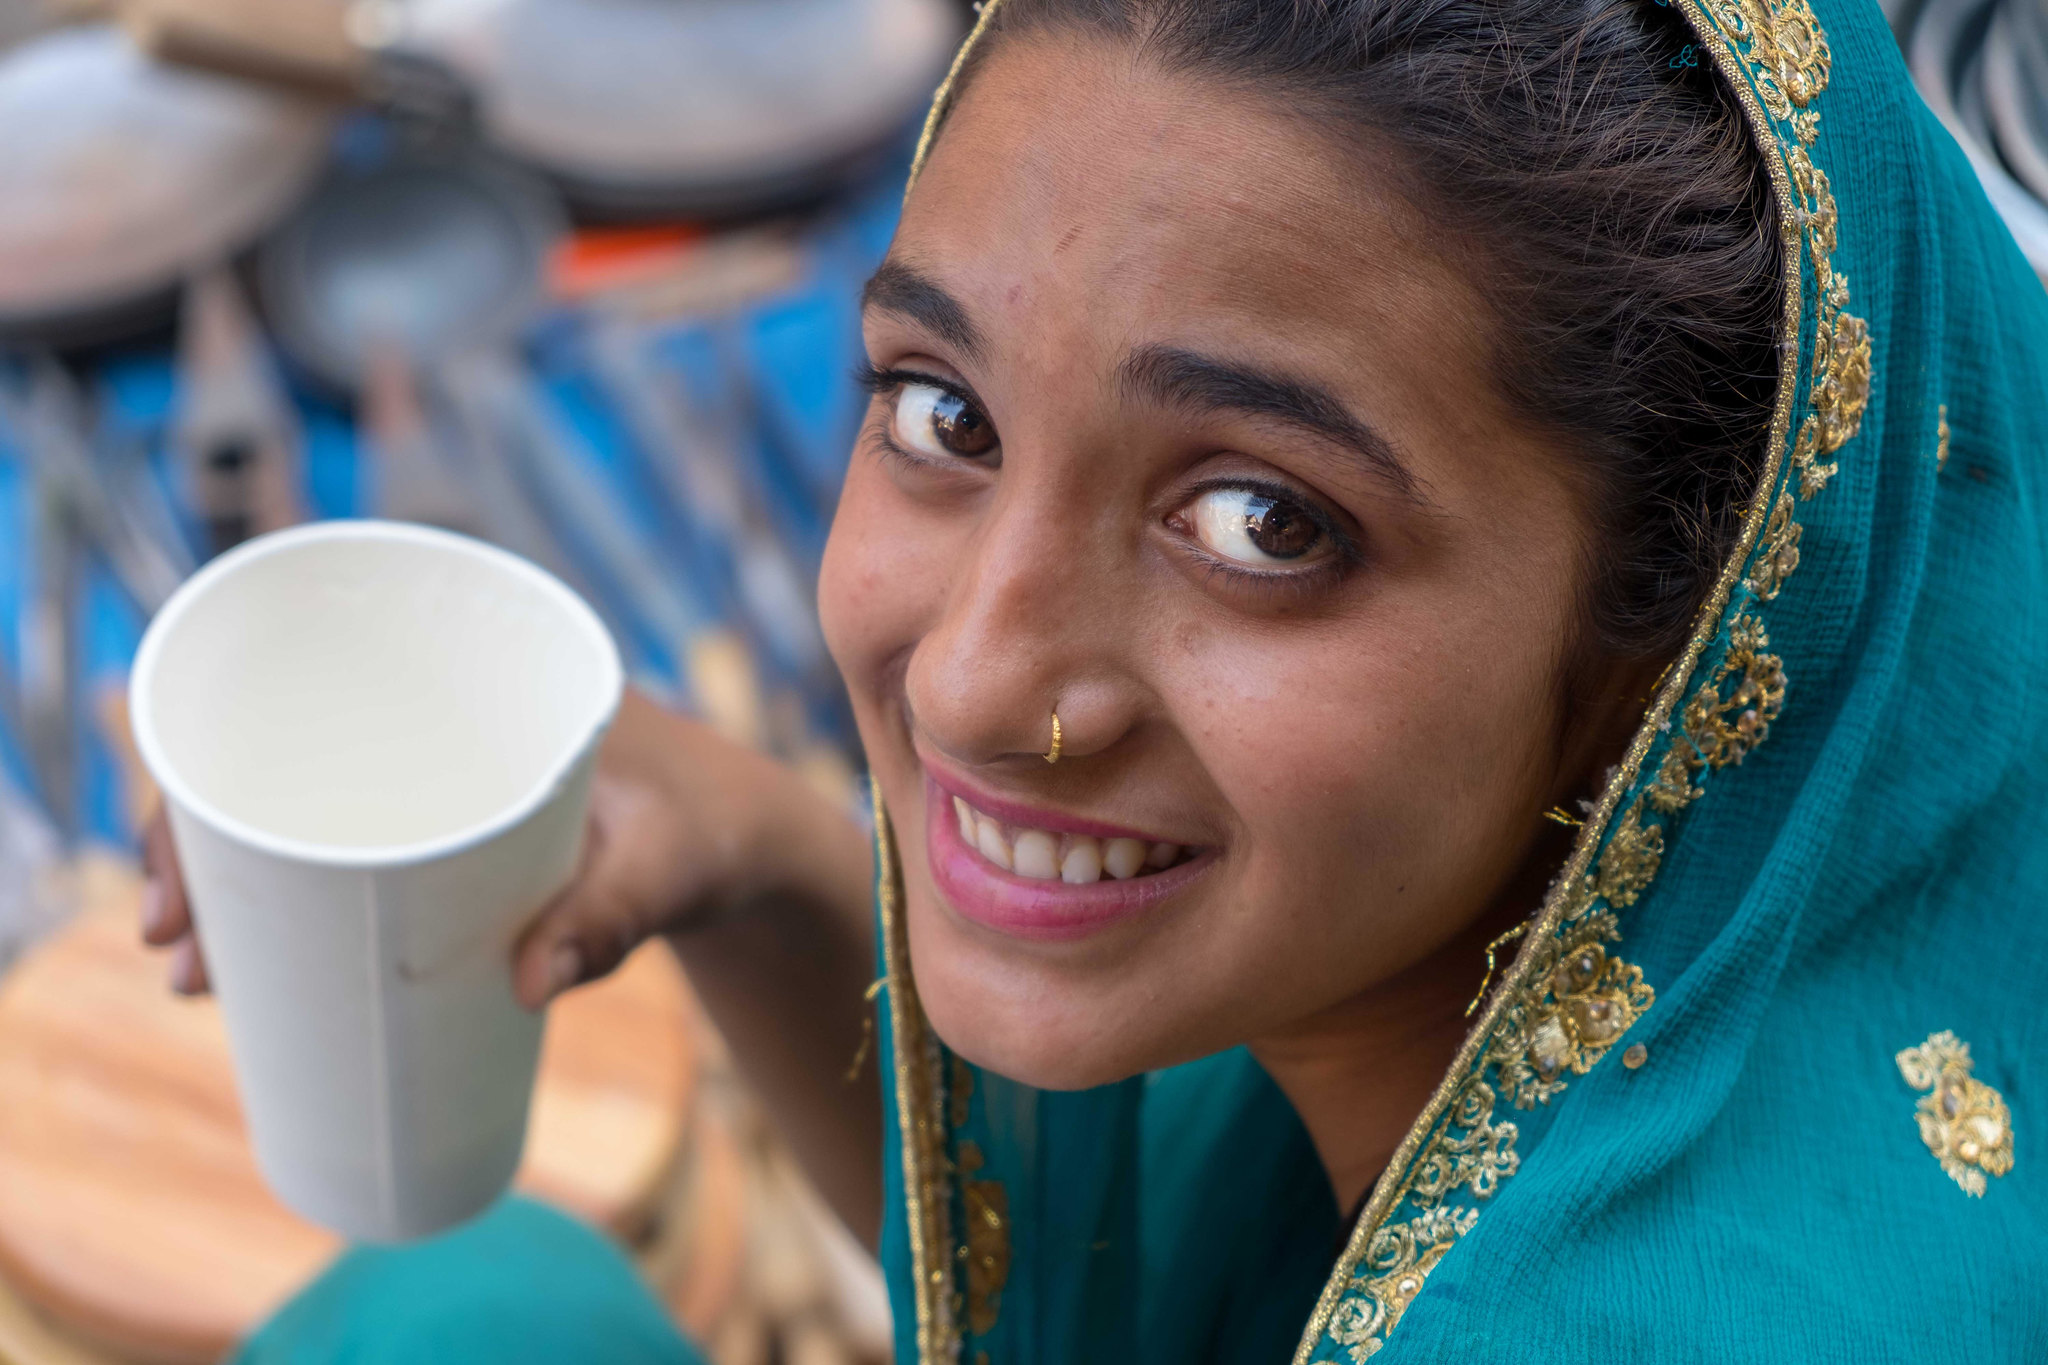 A young woman selling home made utensils on the street